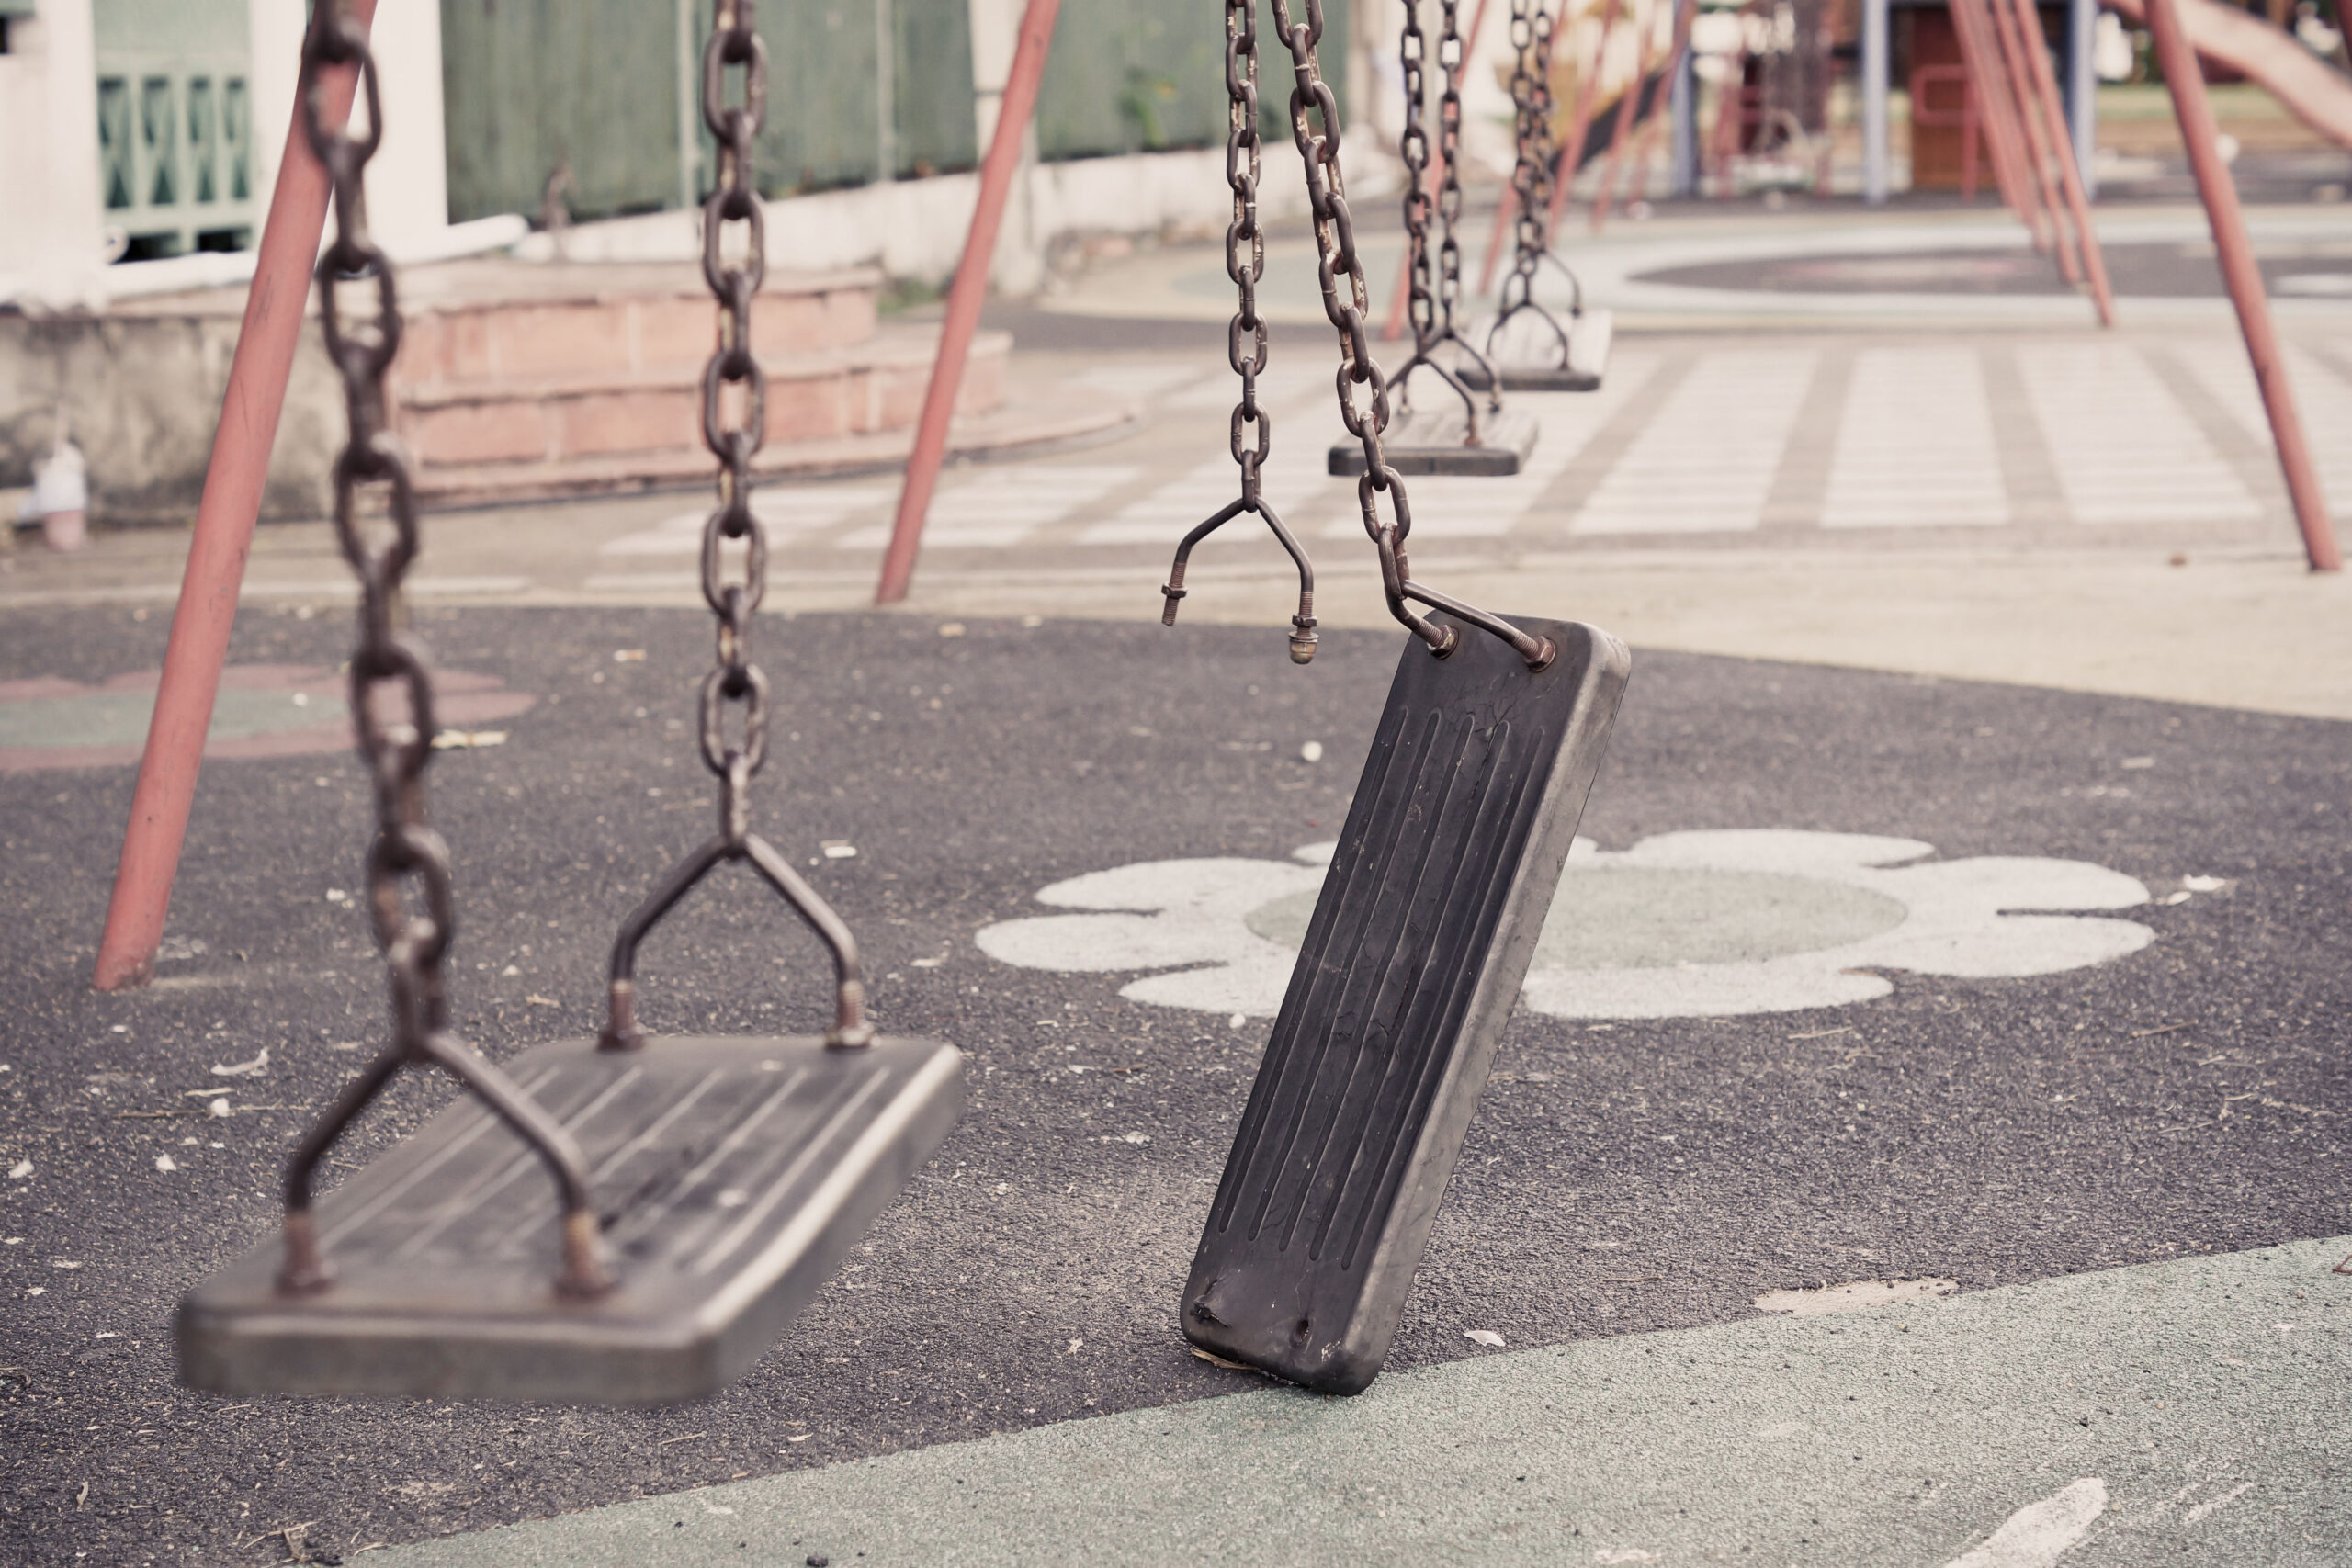 Council Negligence in Playground Injury Case